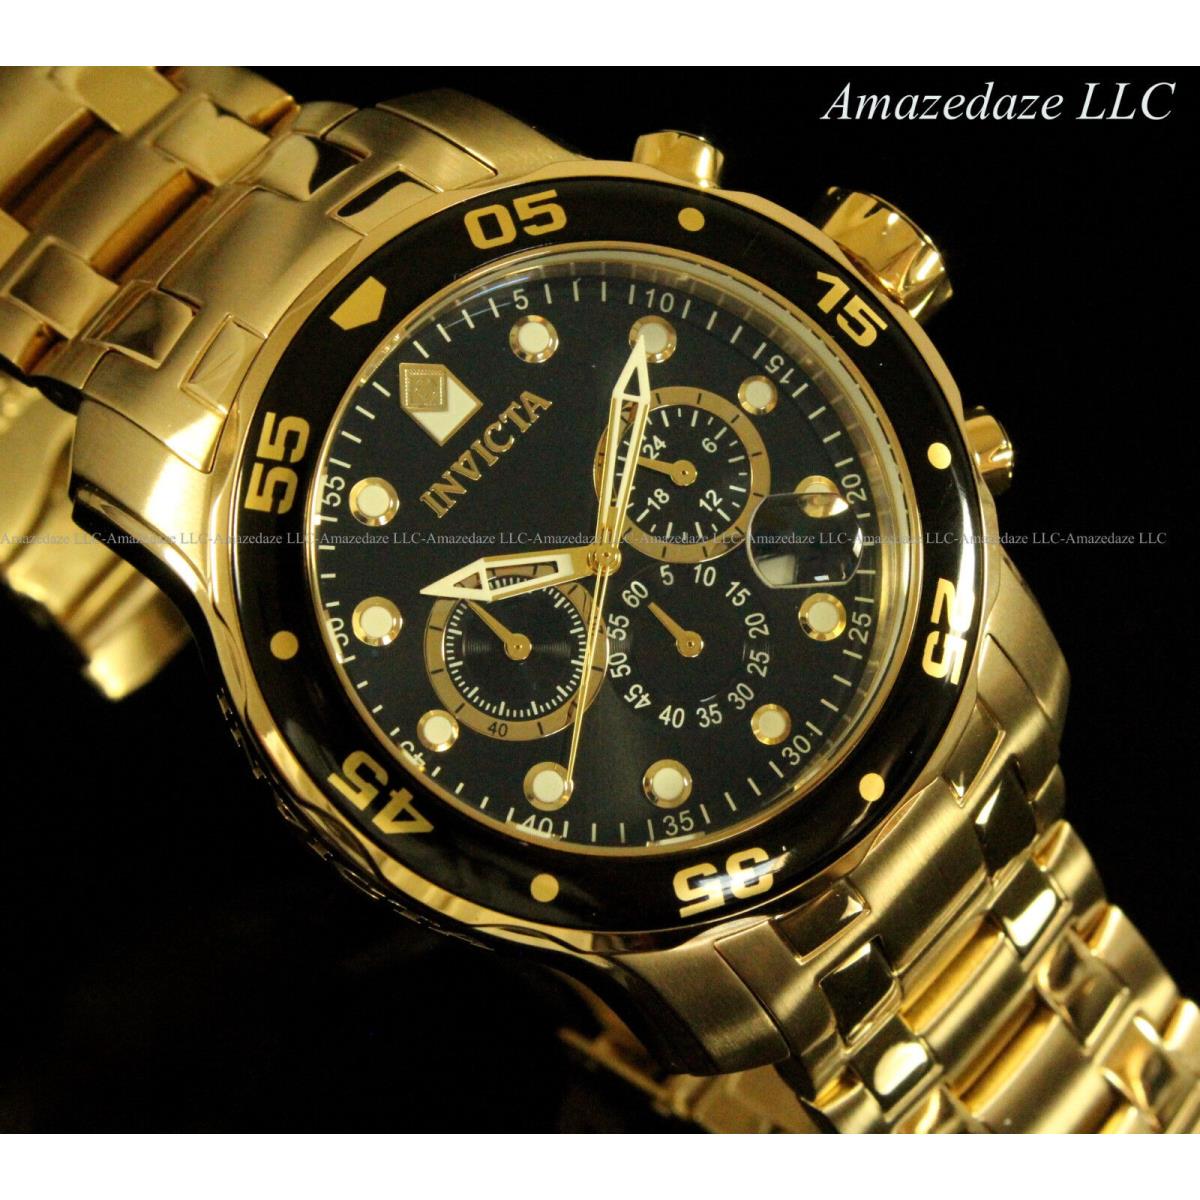 Invicta watch Pro Diver - Black Dial, Yellow Gold Band, Black Bezel